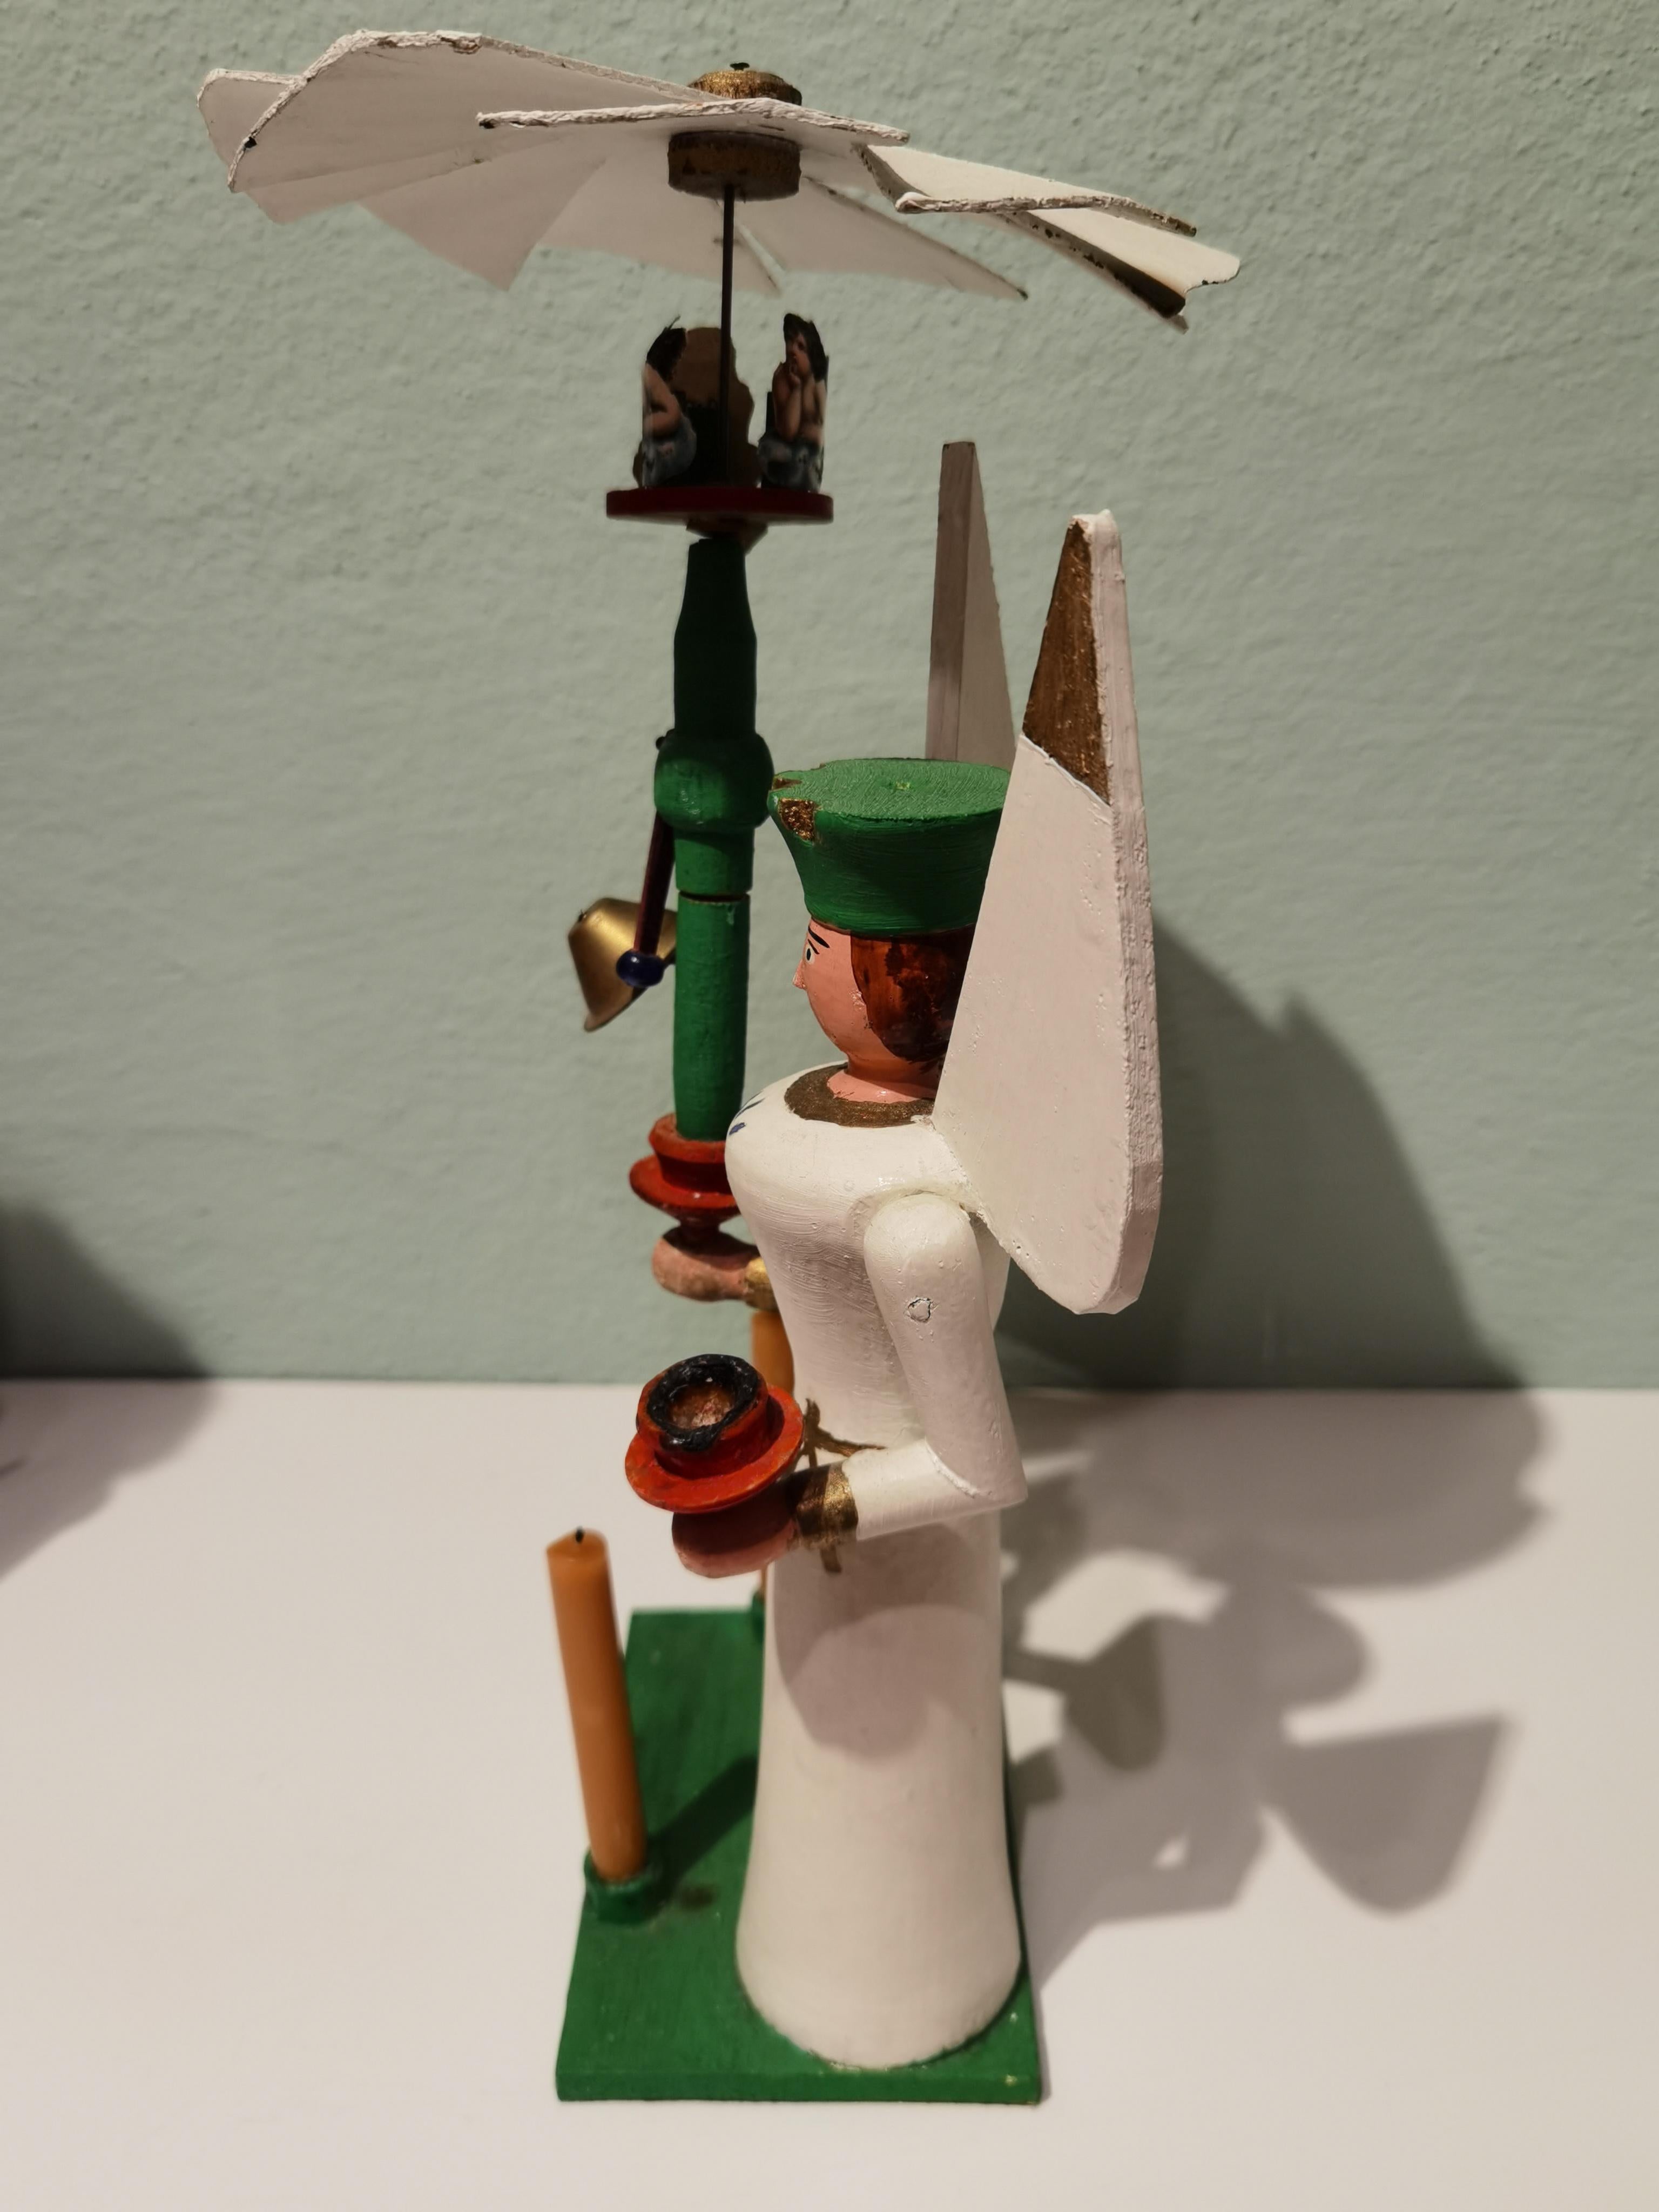 Vintage German Christmas angel sculpture handmade in wood. From the Erzgebirge. The traditional hand carved angel is hand painted and stands on a rectangular green wooden plateau.
The heat of the 3 burning candles activates the play. The sculpture